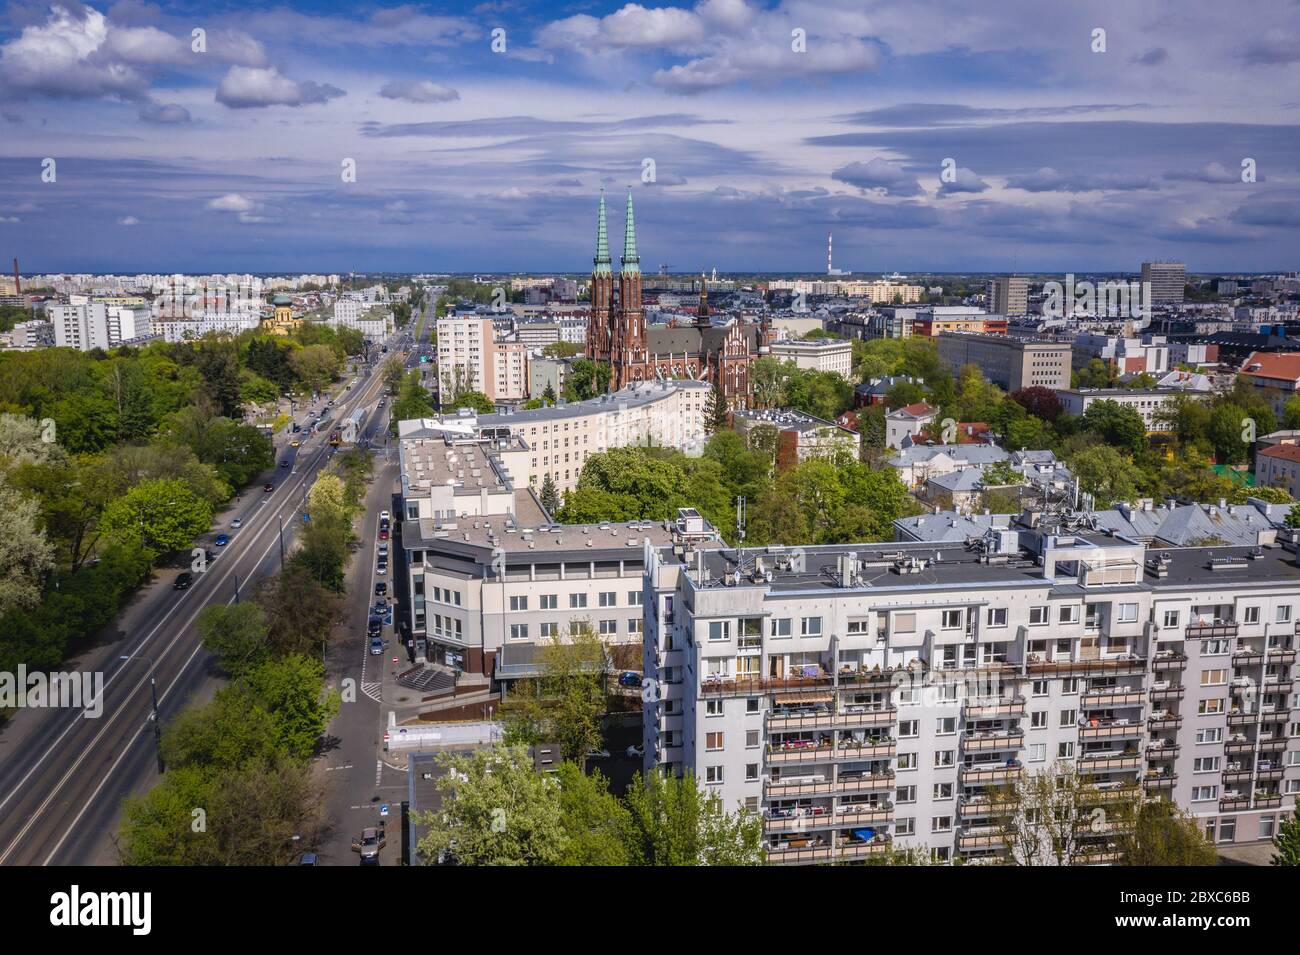 Aerial view in Praga Polnoc district of Warsaw city, Poland with Cathedral of St Michael the Archangel and St Florian the Martyr Stock Photo